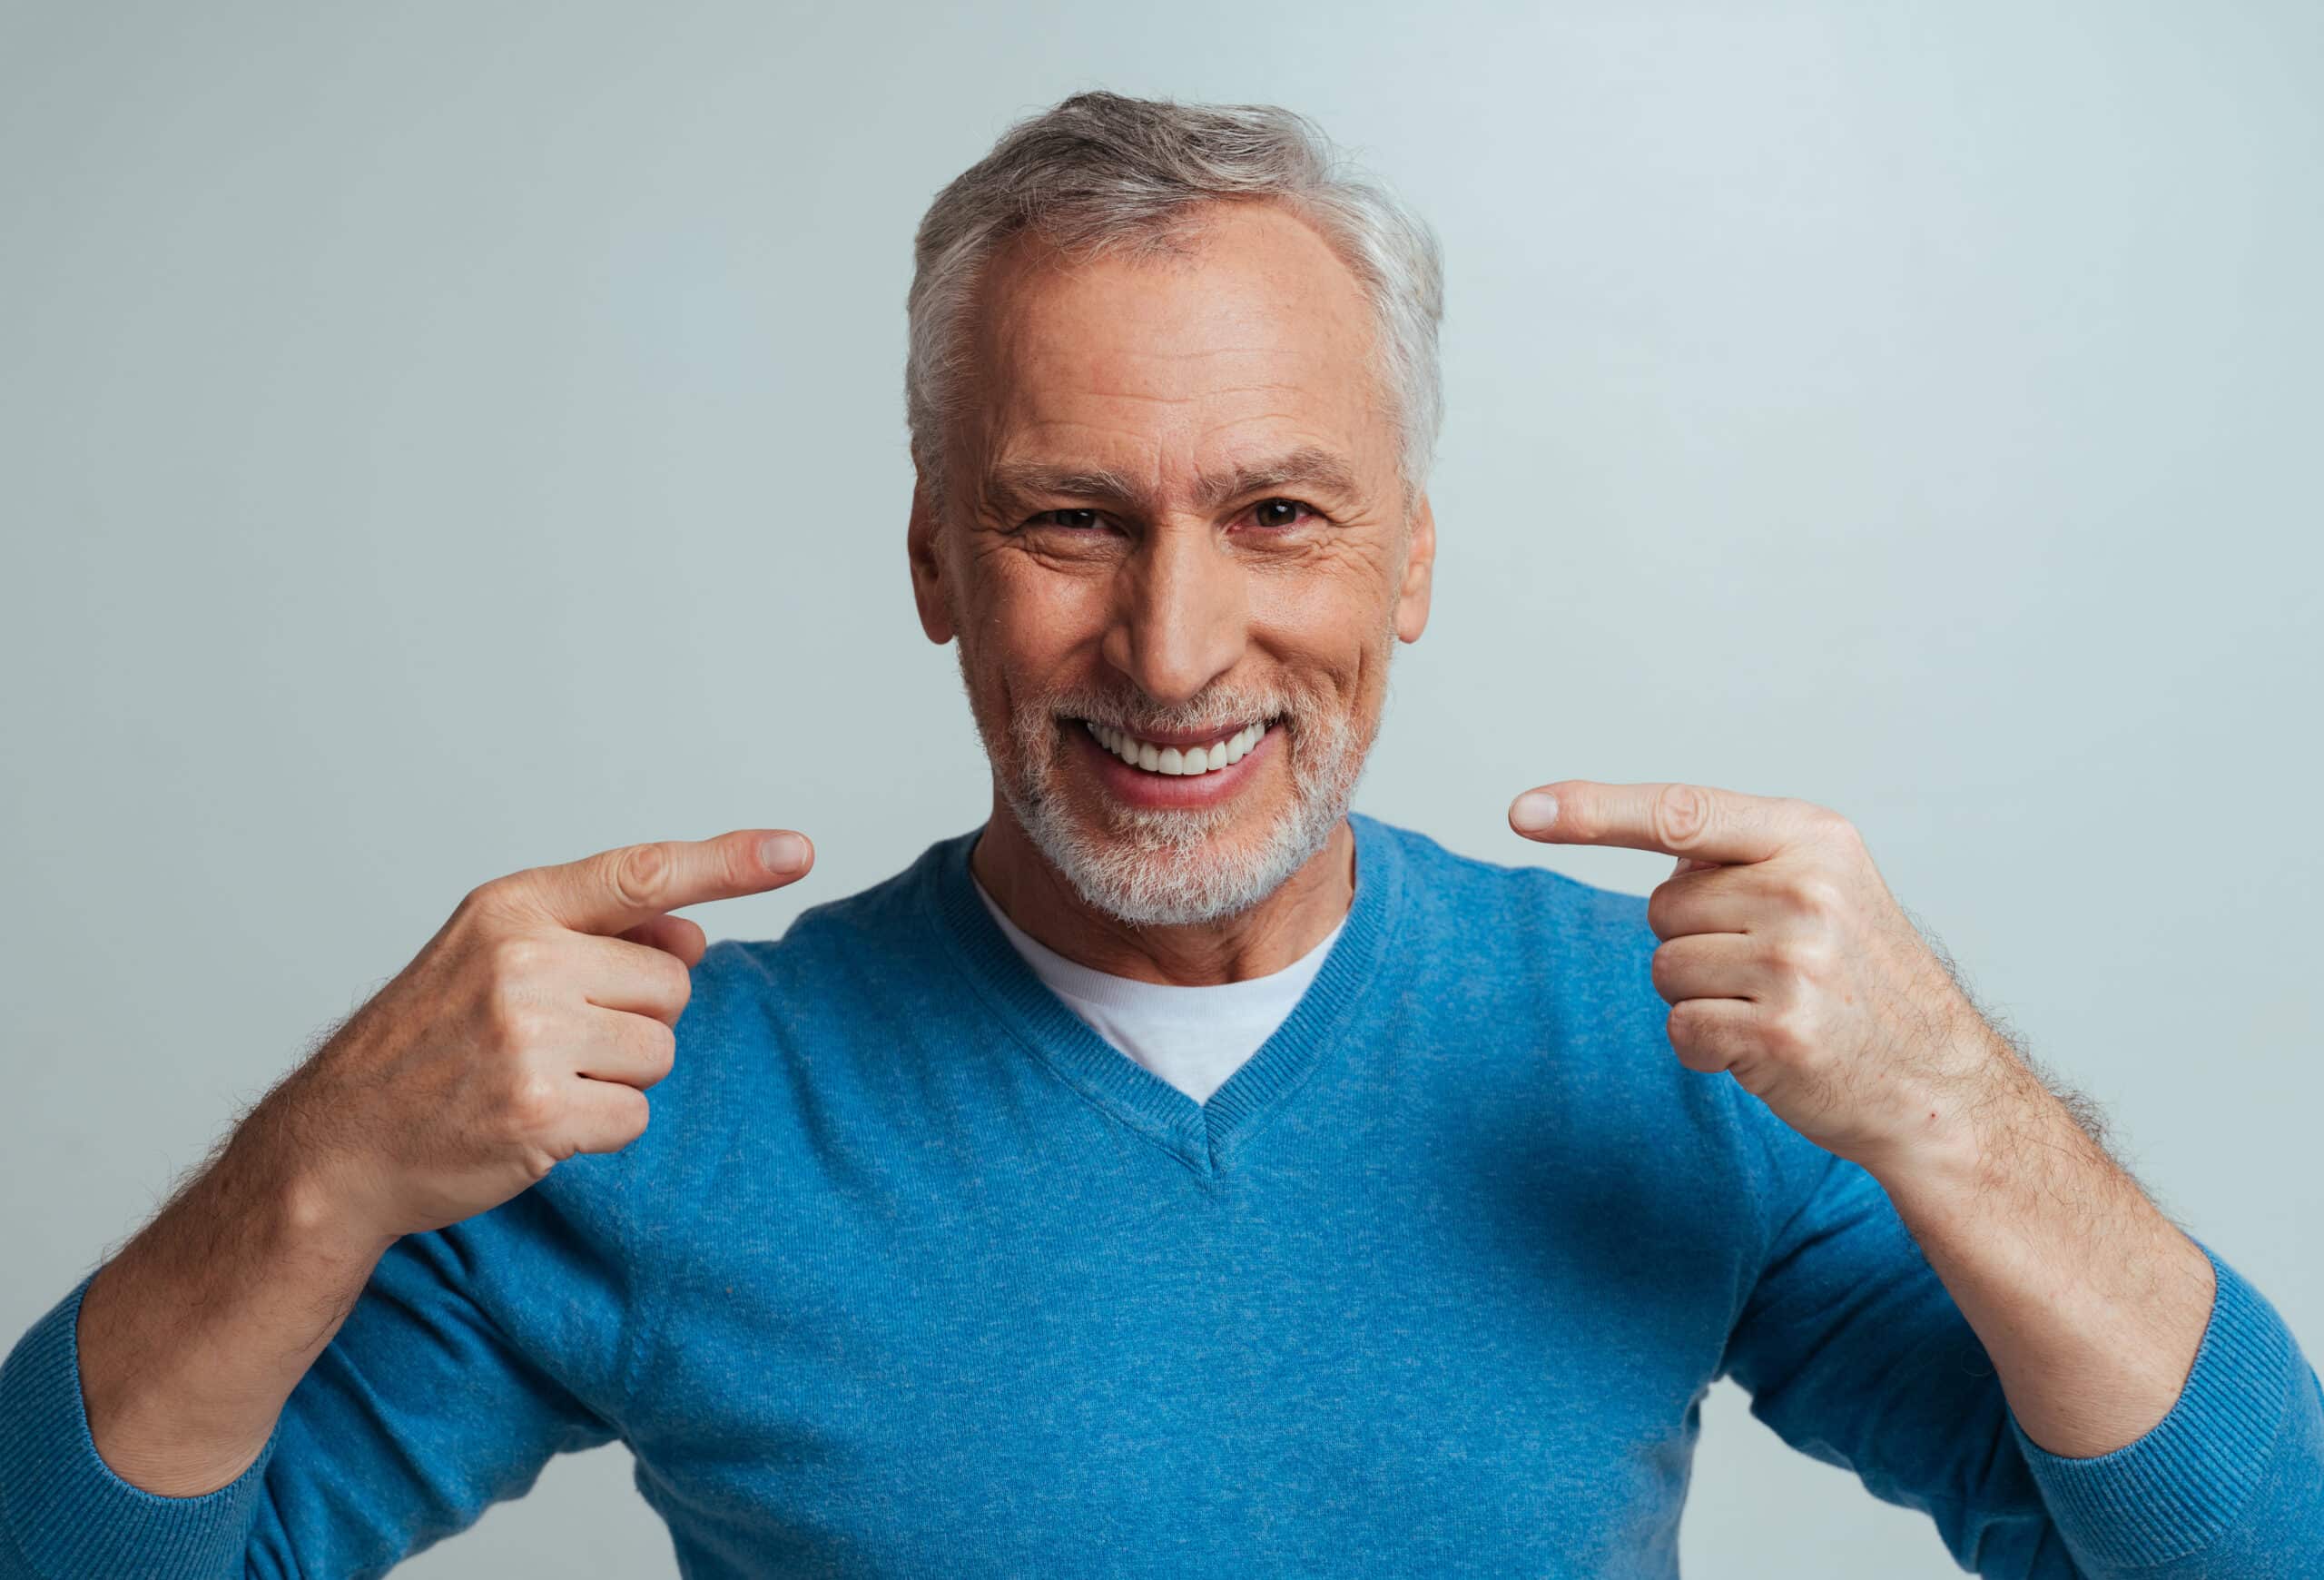 Things You Should Know About Dentures Right Now Blacks Forks Dental dentist in Mountain View WY Dr. Devin Irene Mountain view Restorative Dentistry